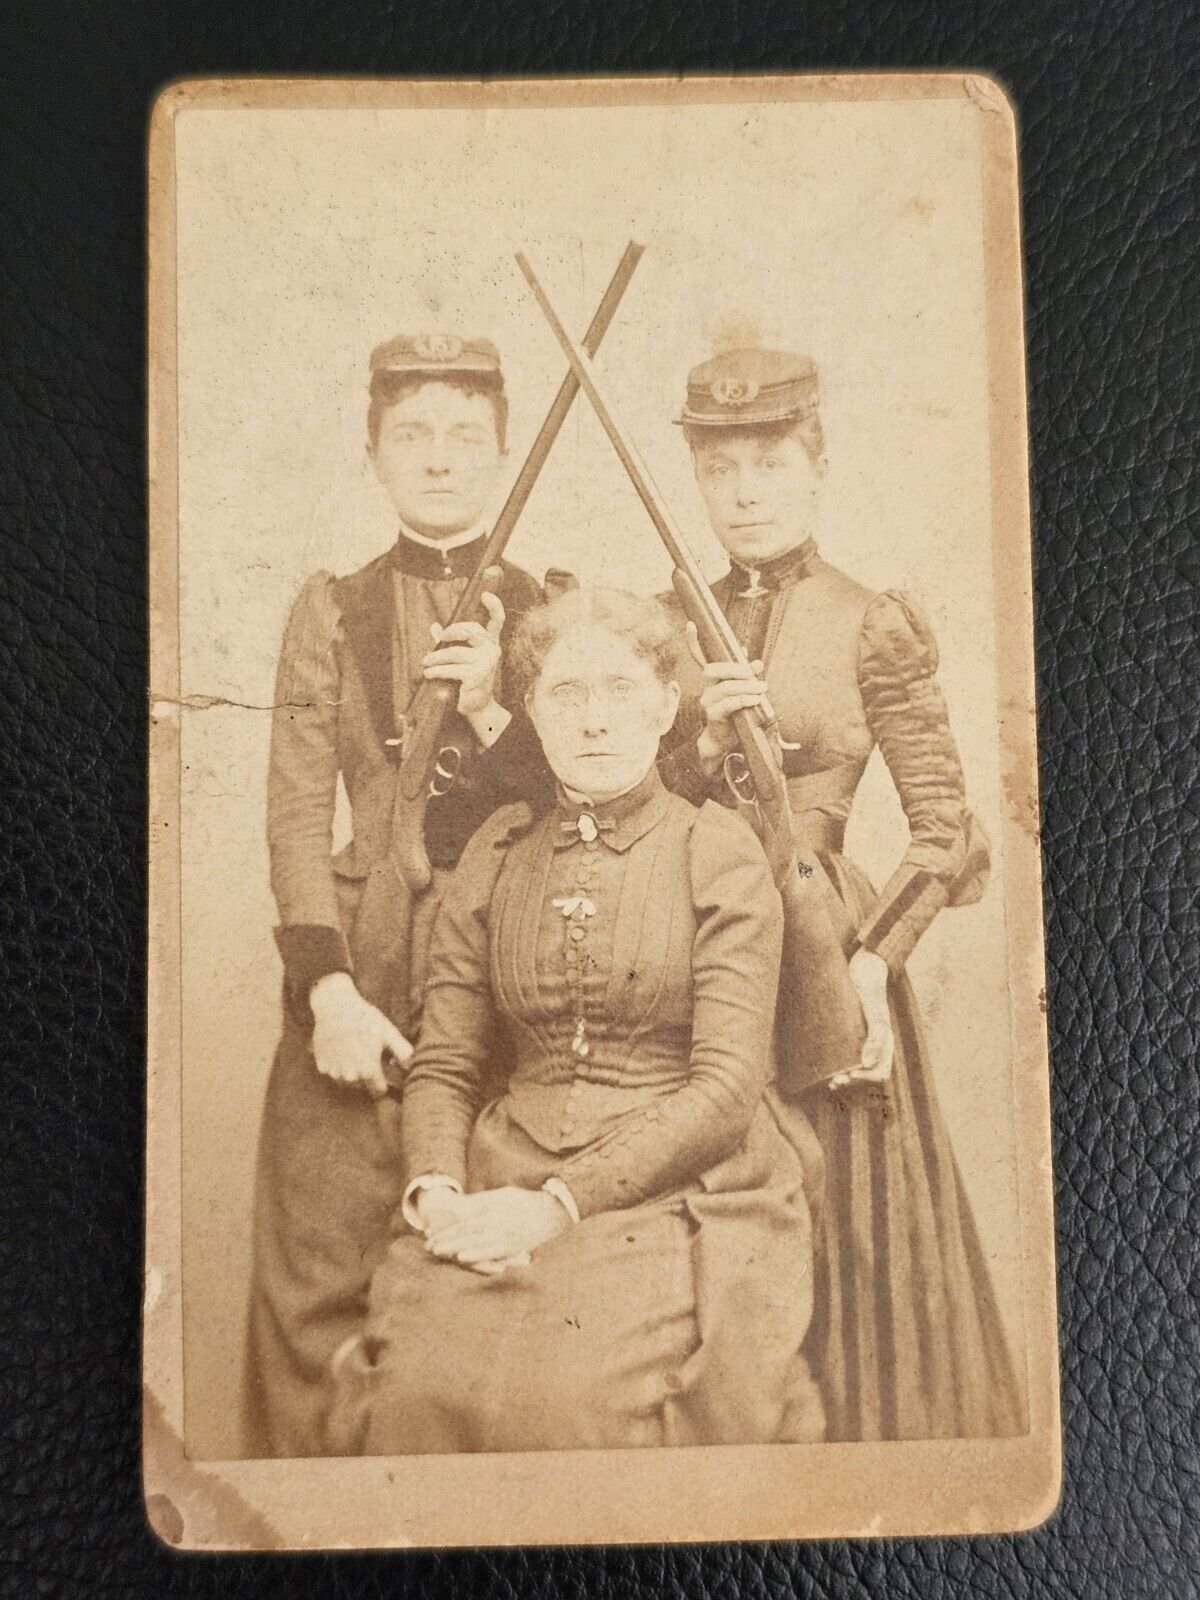 Not Your Typical CDV Image of 19th Century Ladies - Kepis & Guns - One of a Kind